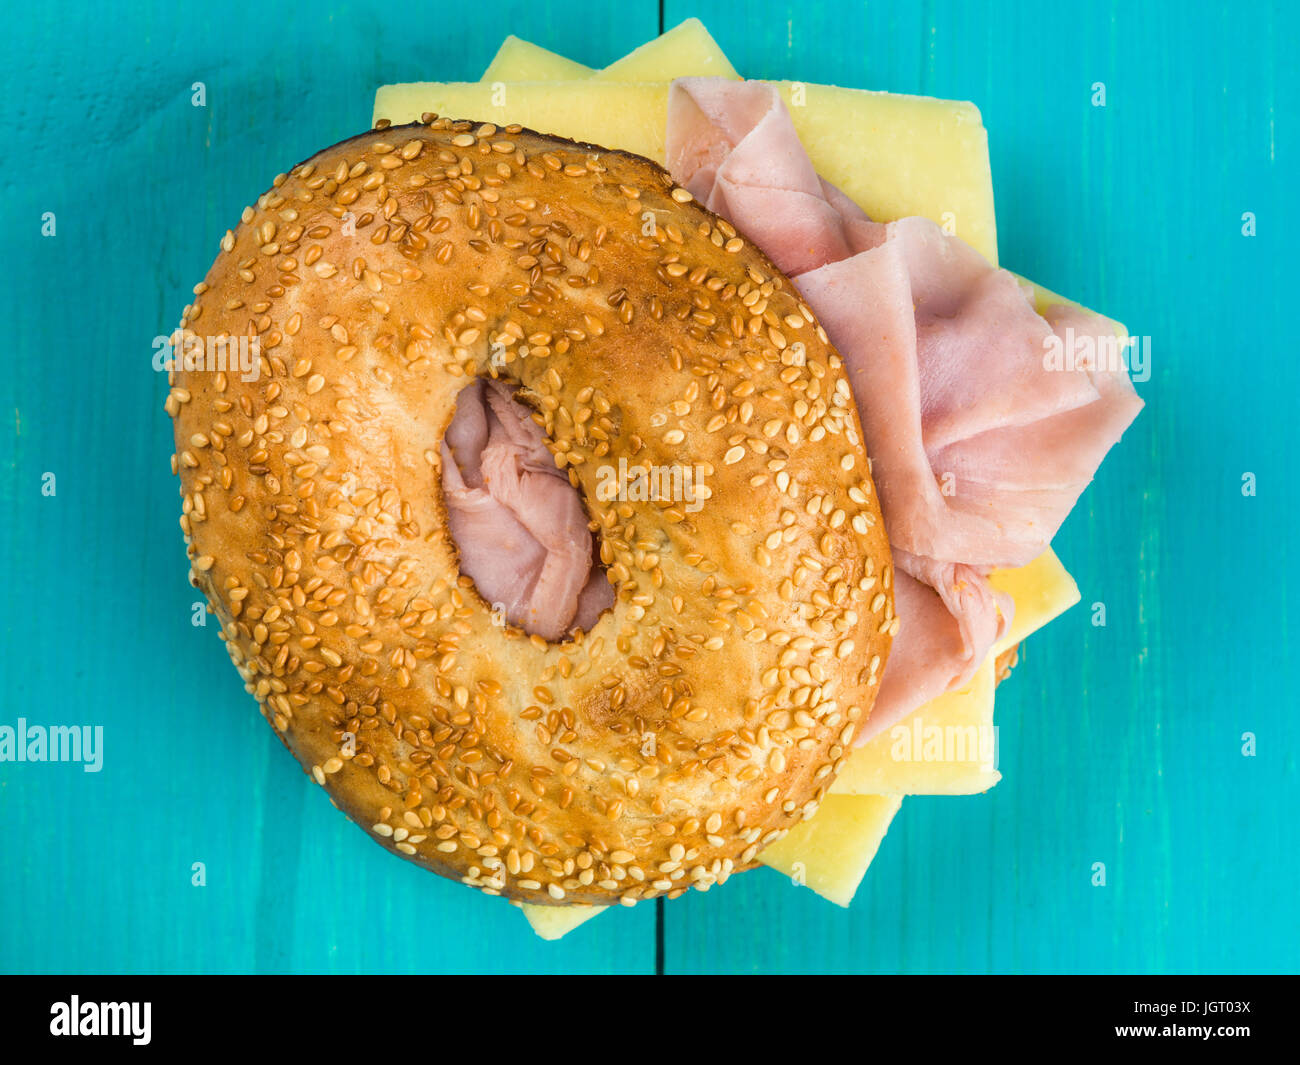 Ham and Cheese Toasted Bagel Against a Blue Background Stock Photo